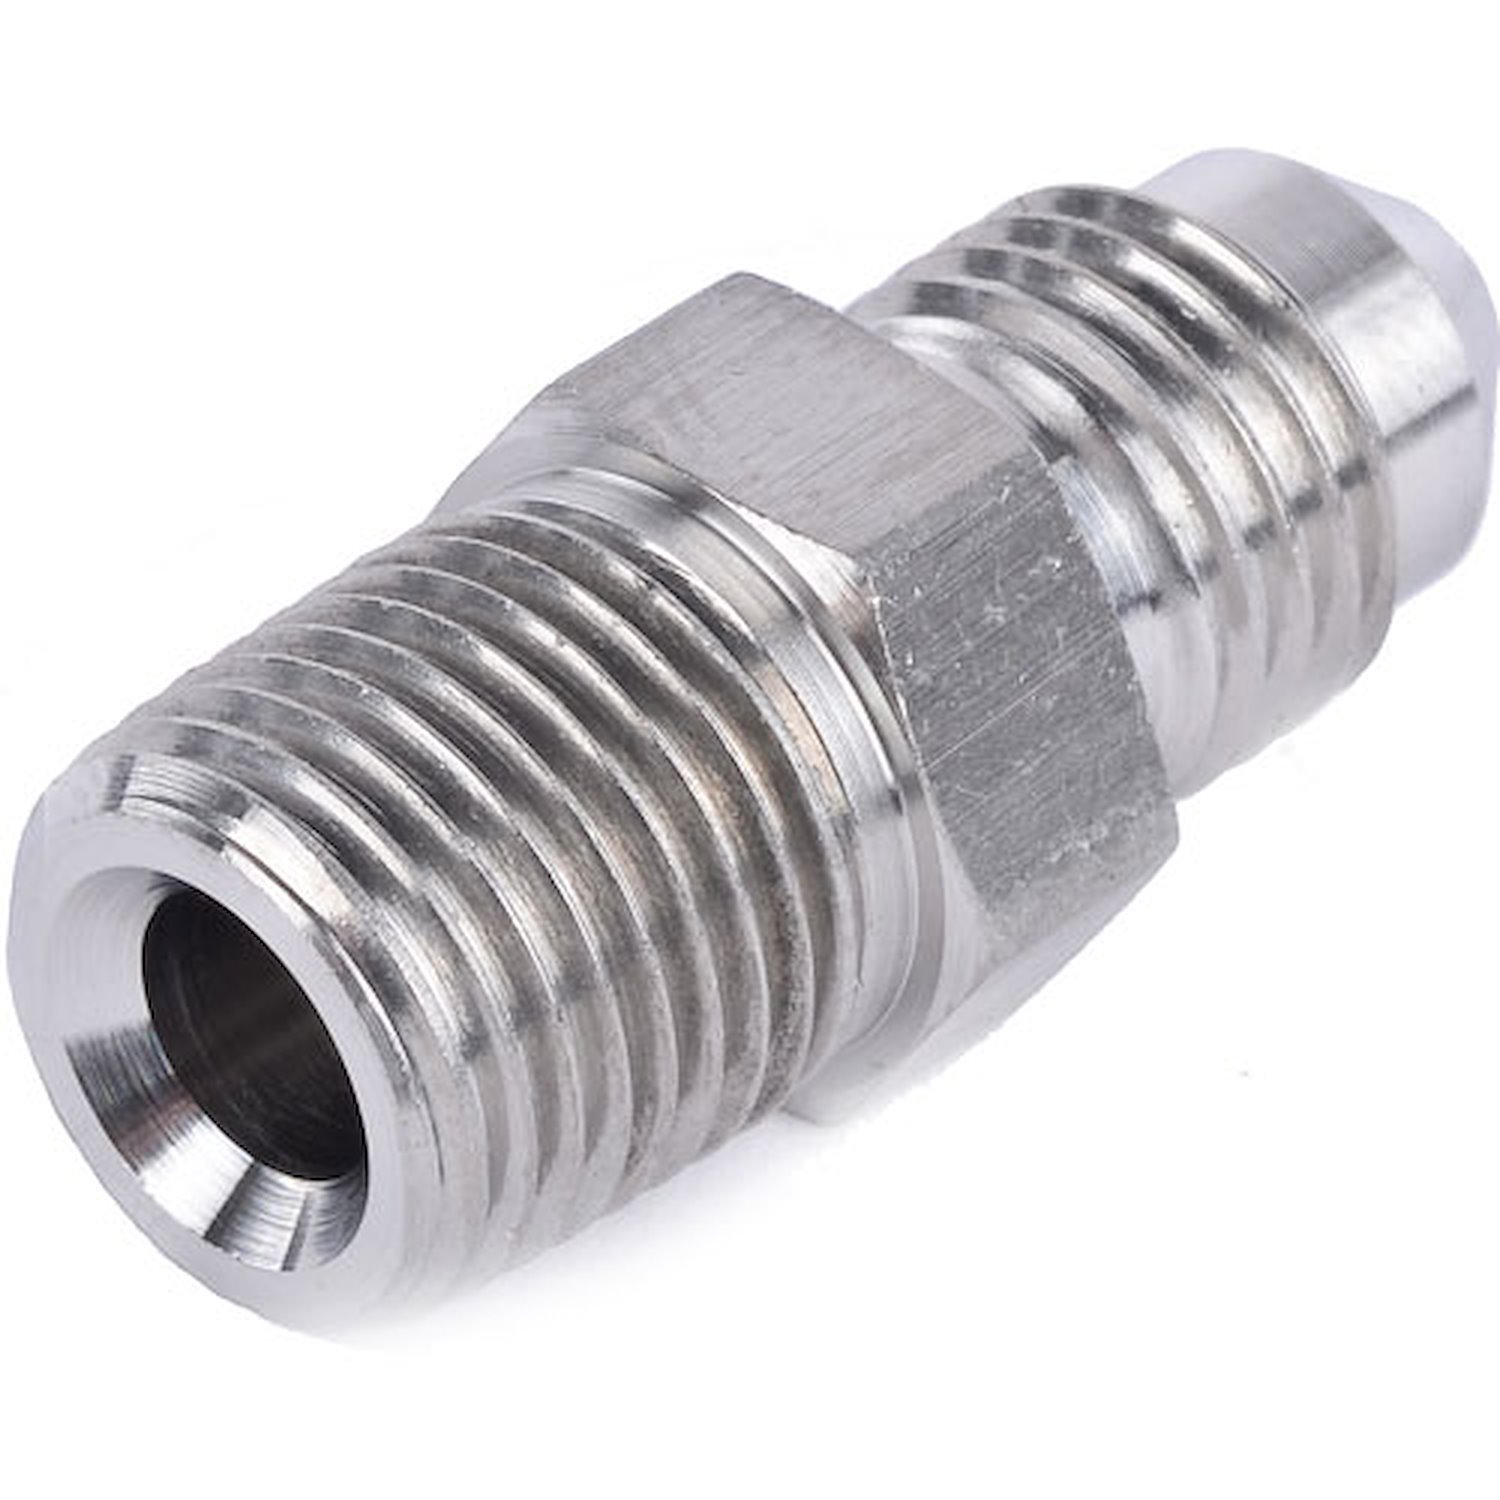 Brake Line Fitting Adapter [-3 AN to 1/8 in. NPT, Stainless Steel]